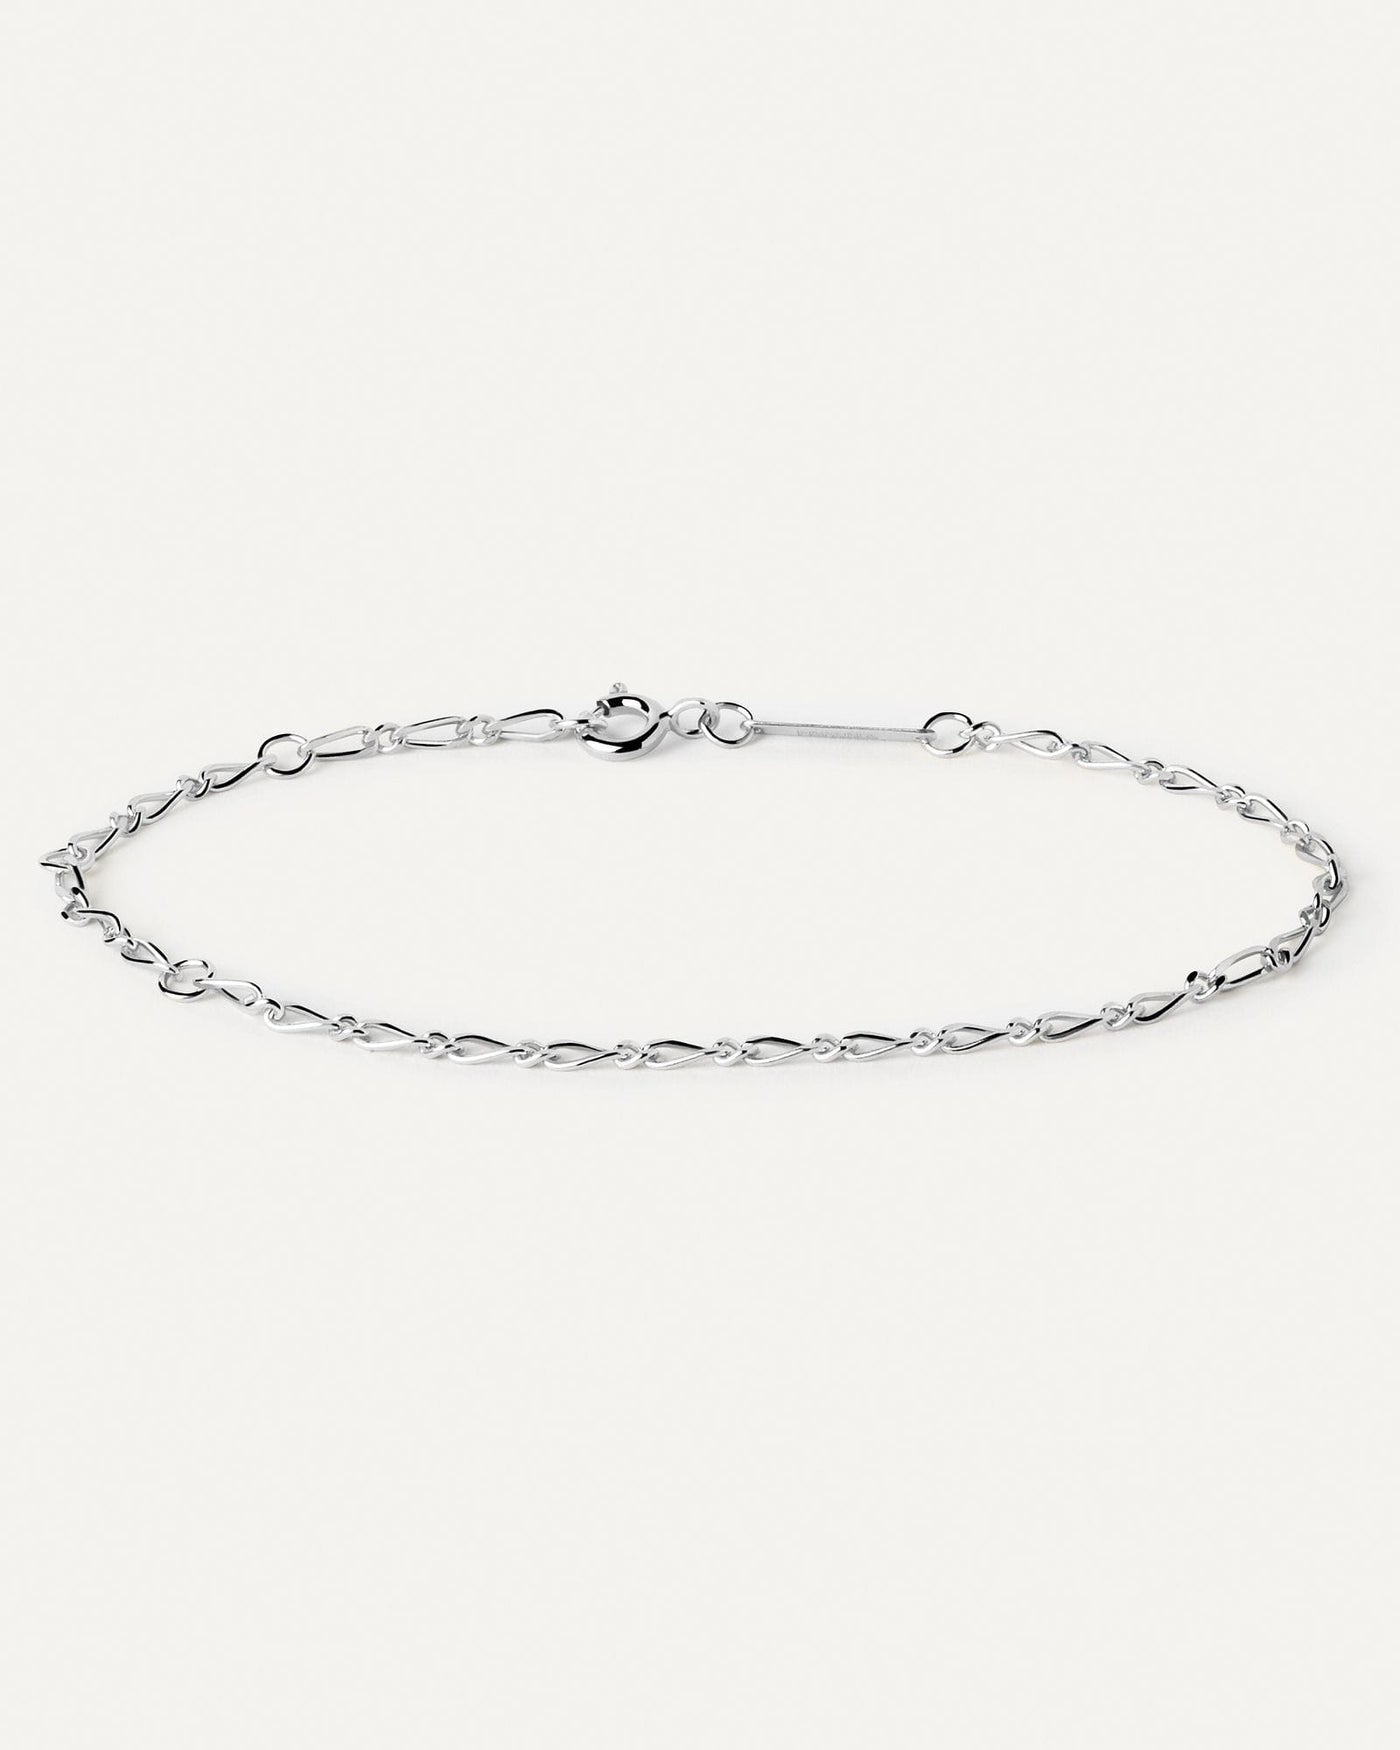 2024 Selection | Adele Silver Chain Bracelet. Sleek silver chain bracelet with intertwined asymmetric links. Get the latest arrival from PDPAOLA. Place your order safely and get this Best Seller. Free Shipping.